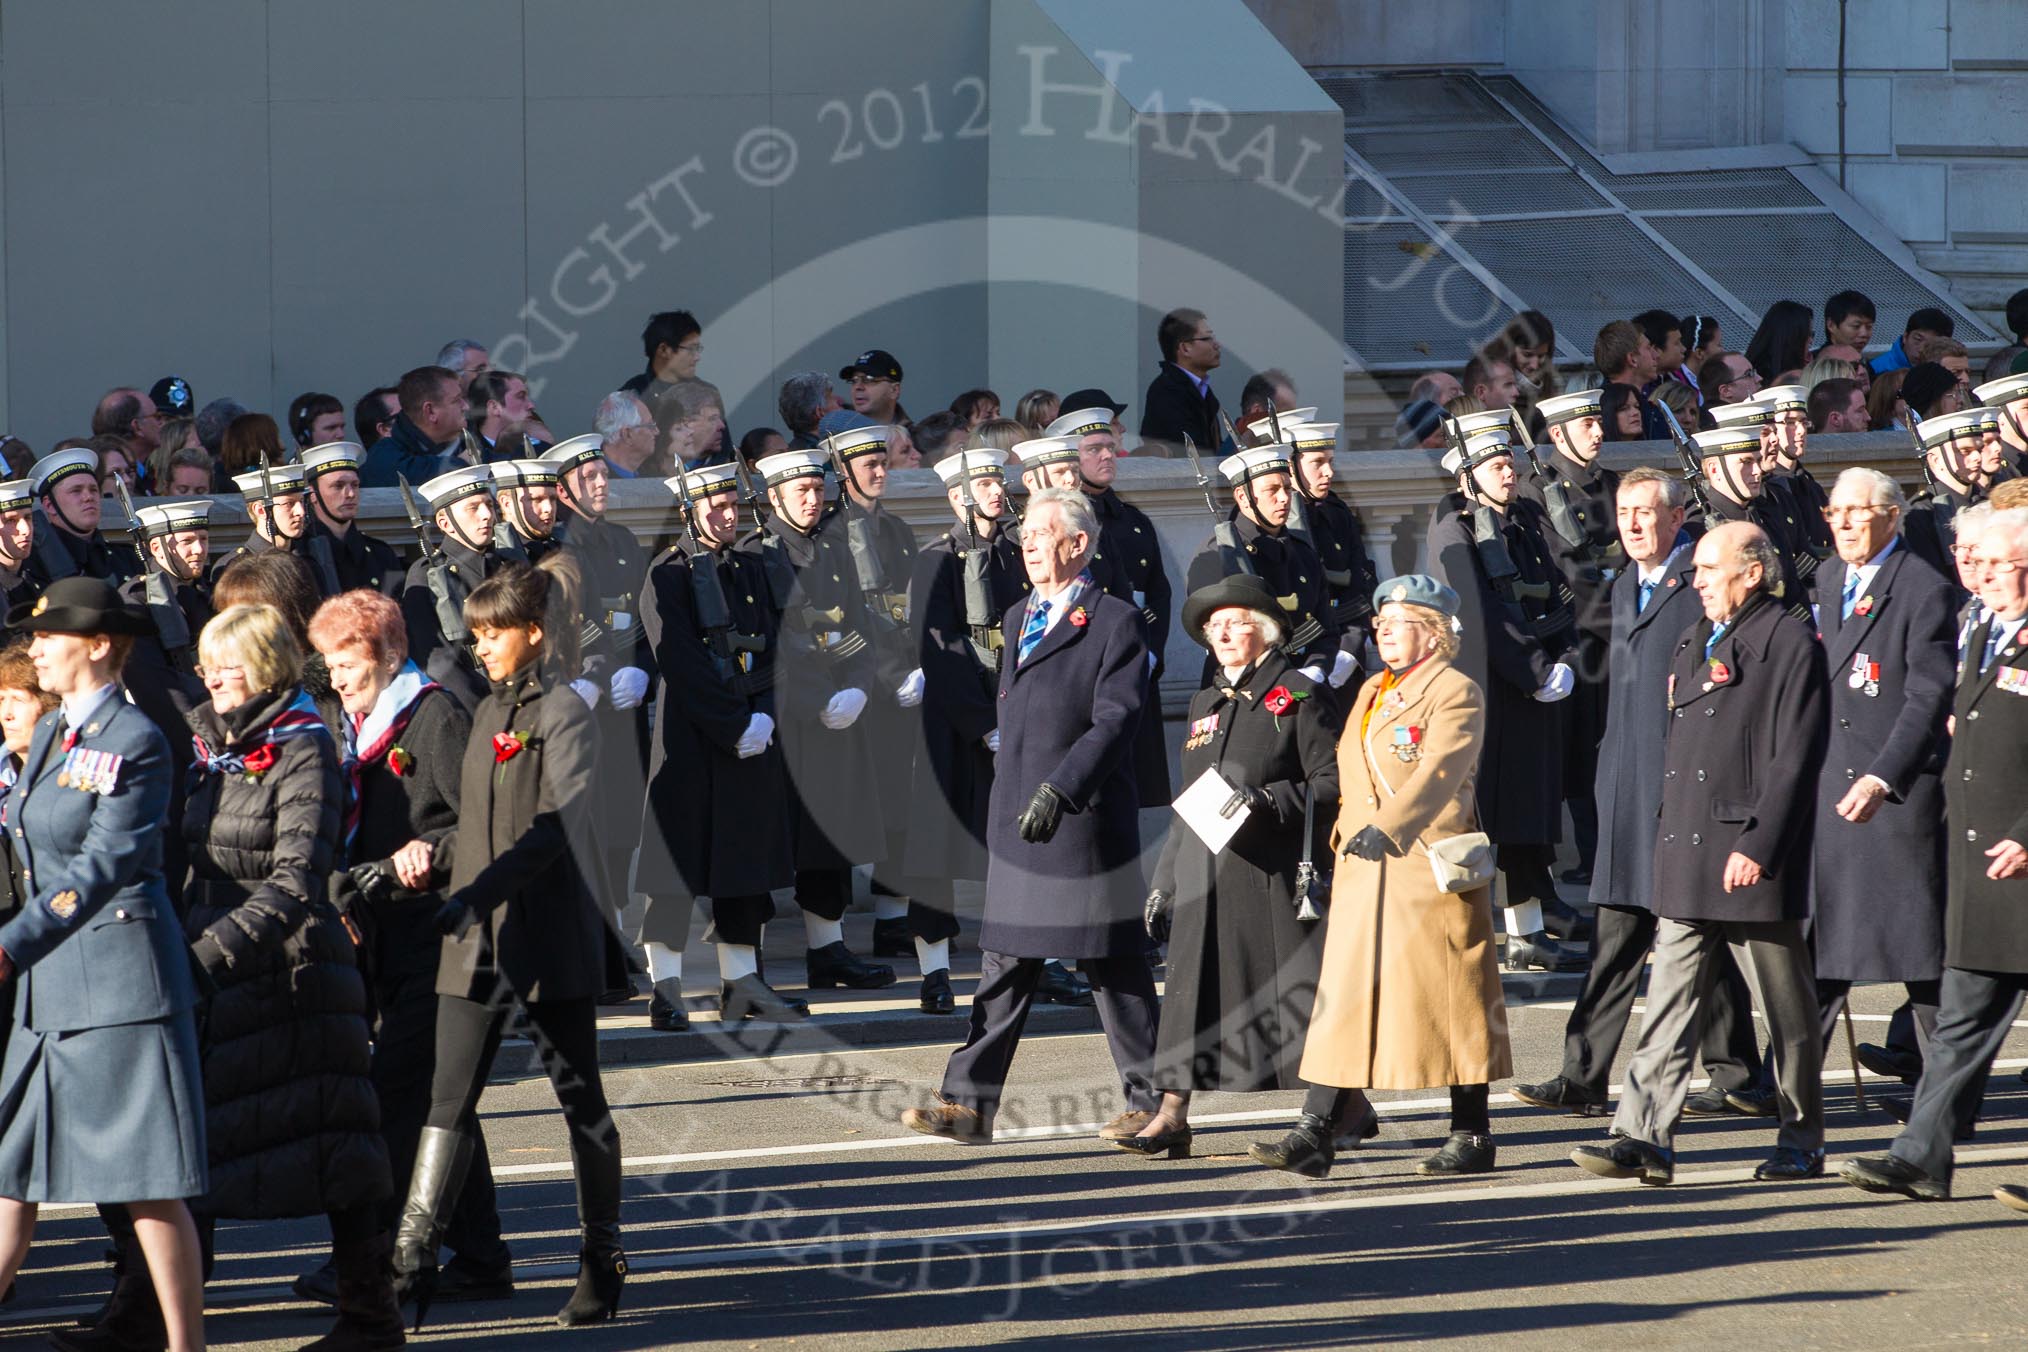 Remembrance Sunday 2012 Cenotaph March Past: Group C13 - Princess Mary's Royal Air Force Nursing Service Association and C14 - Bomber Command Association..
Whitehall, Cenotaph,
London SW1,

United Kingdom,
on 11 November 2012 at 12:02, image #1129